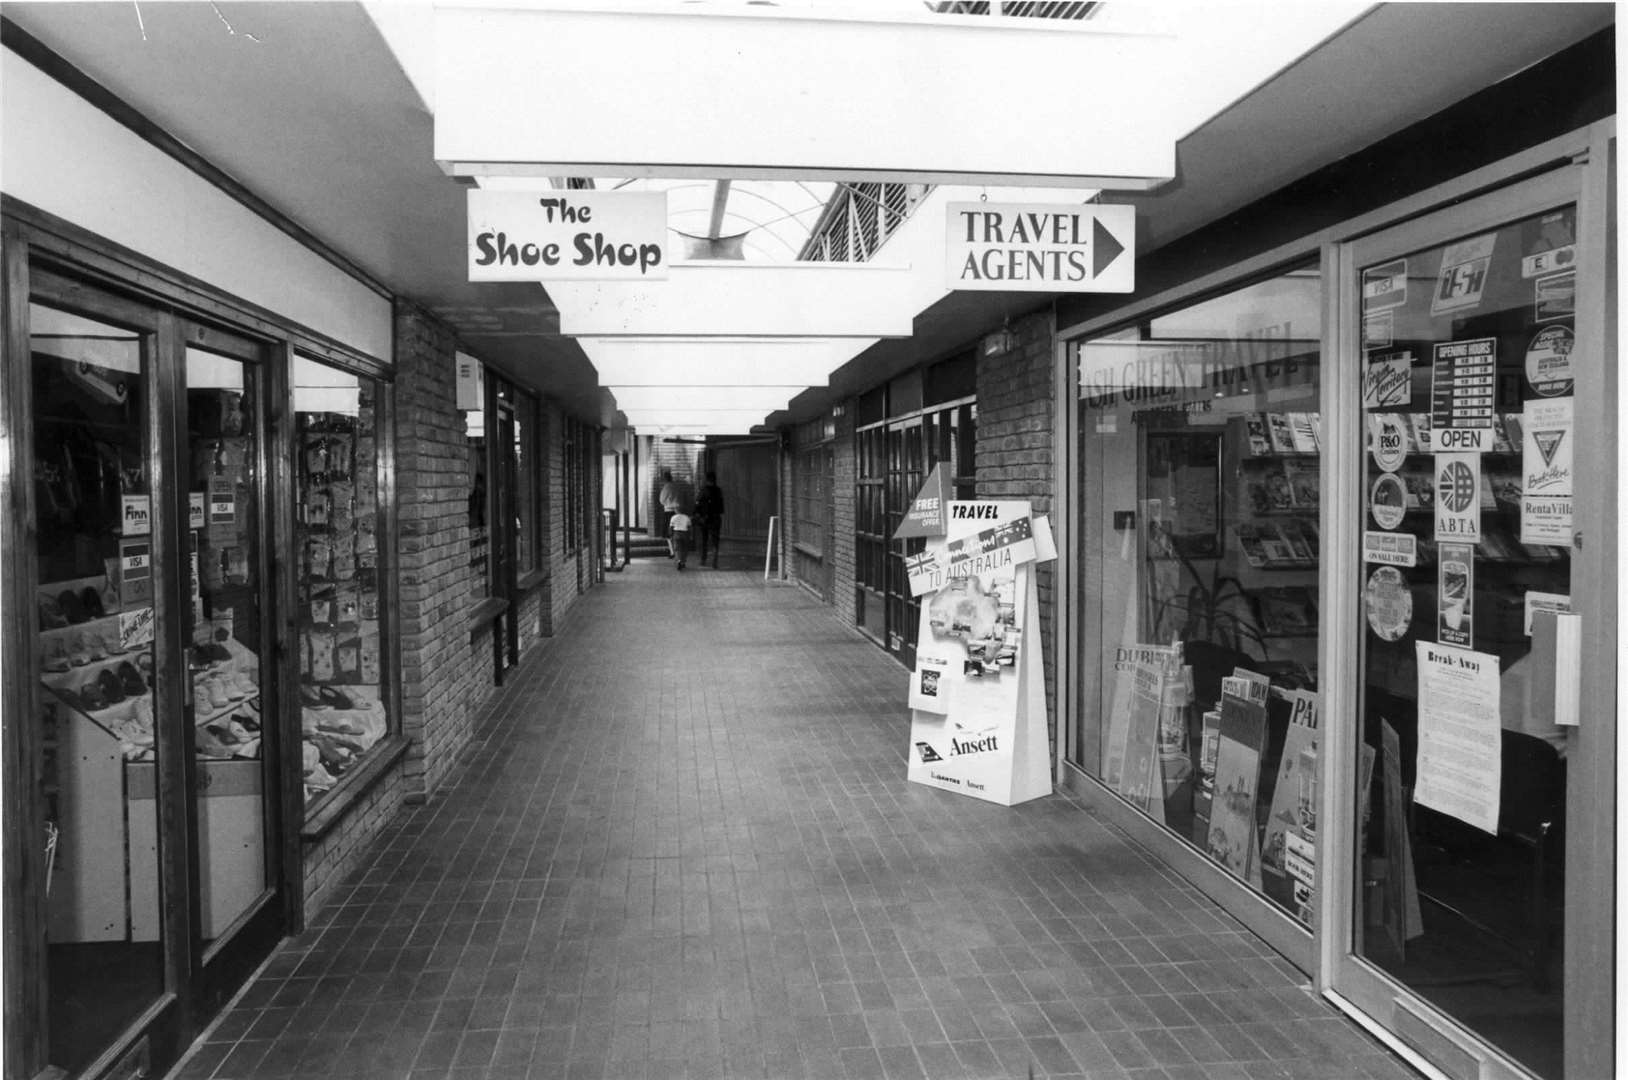 How the centre looked in 1989